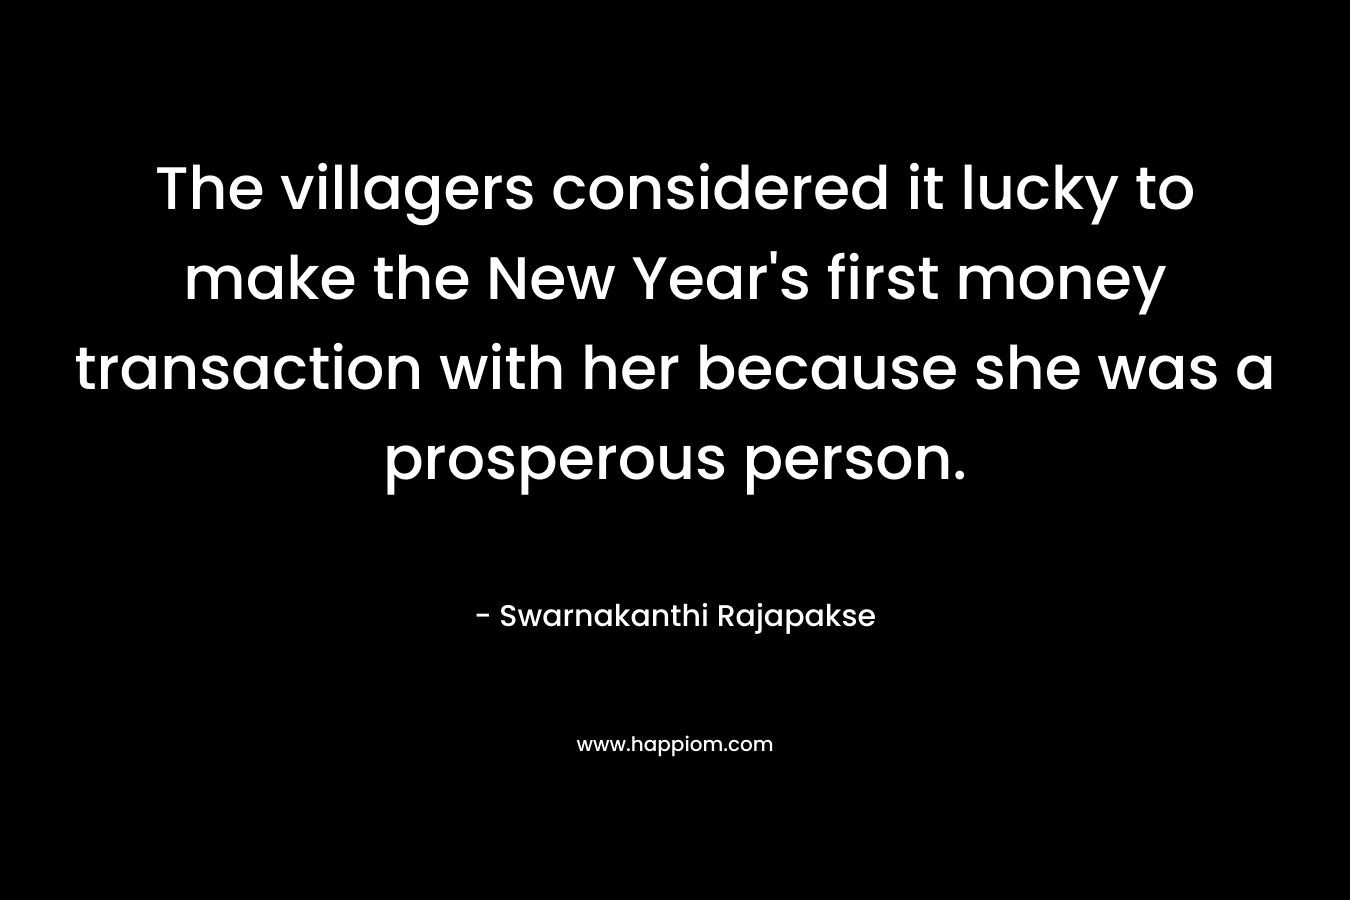 The villagers considered it lucky to make the New Year's first money transaction with her because she was a prosperous person.